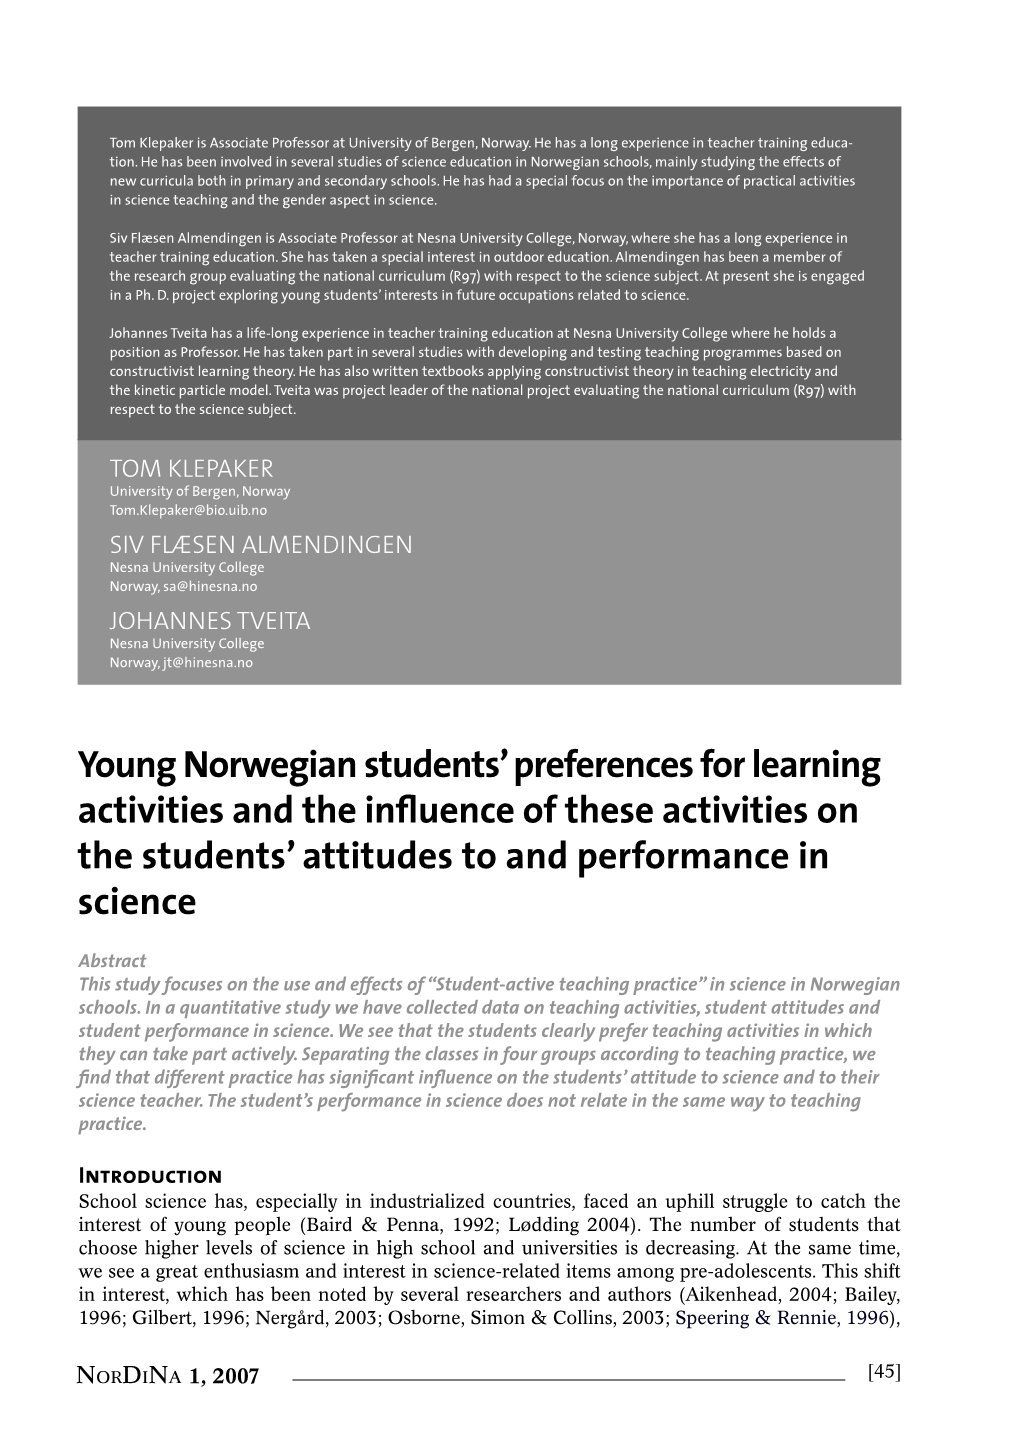 Young Norwegian Students' Preferences for Learning Activities